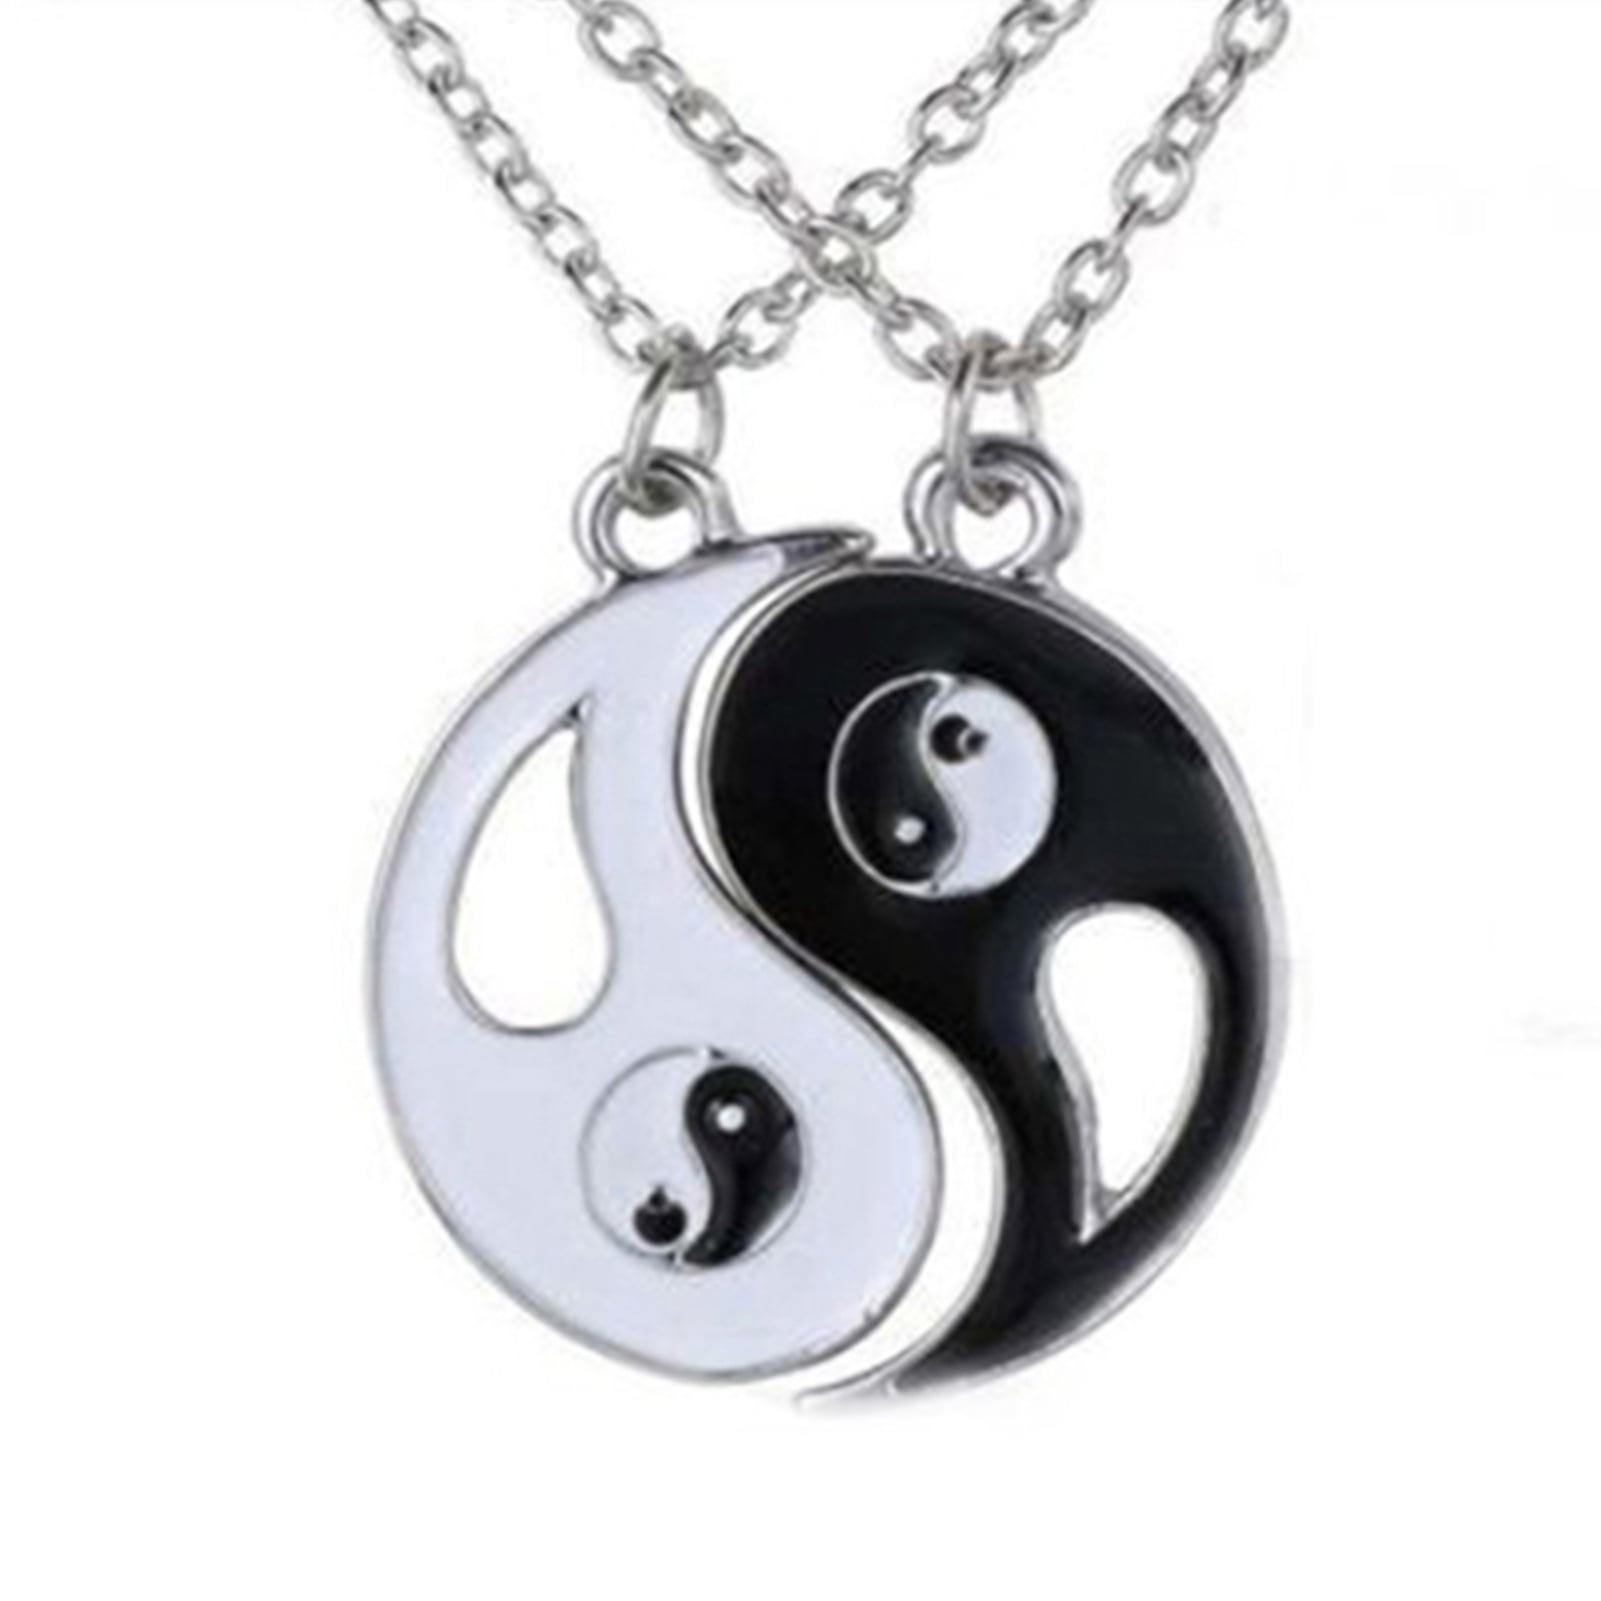 necklaces Two parts black and white yin yang sign necklace 